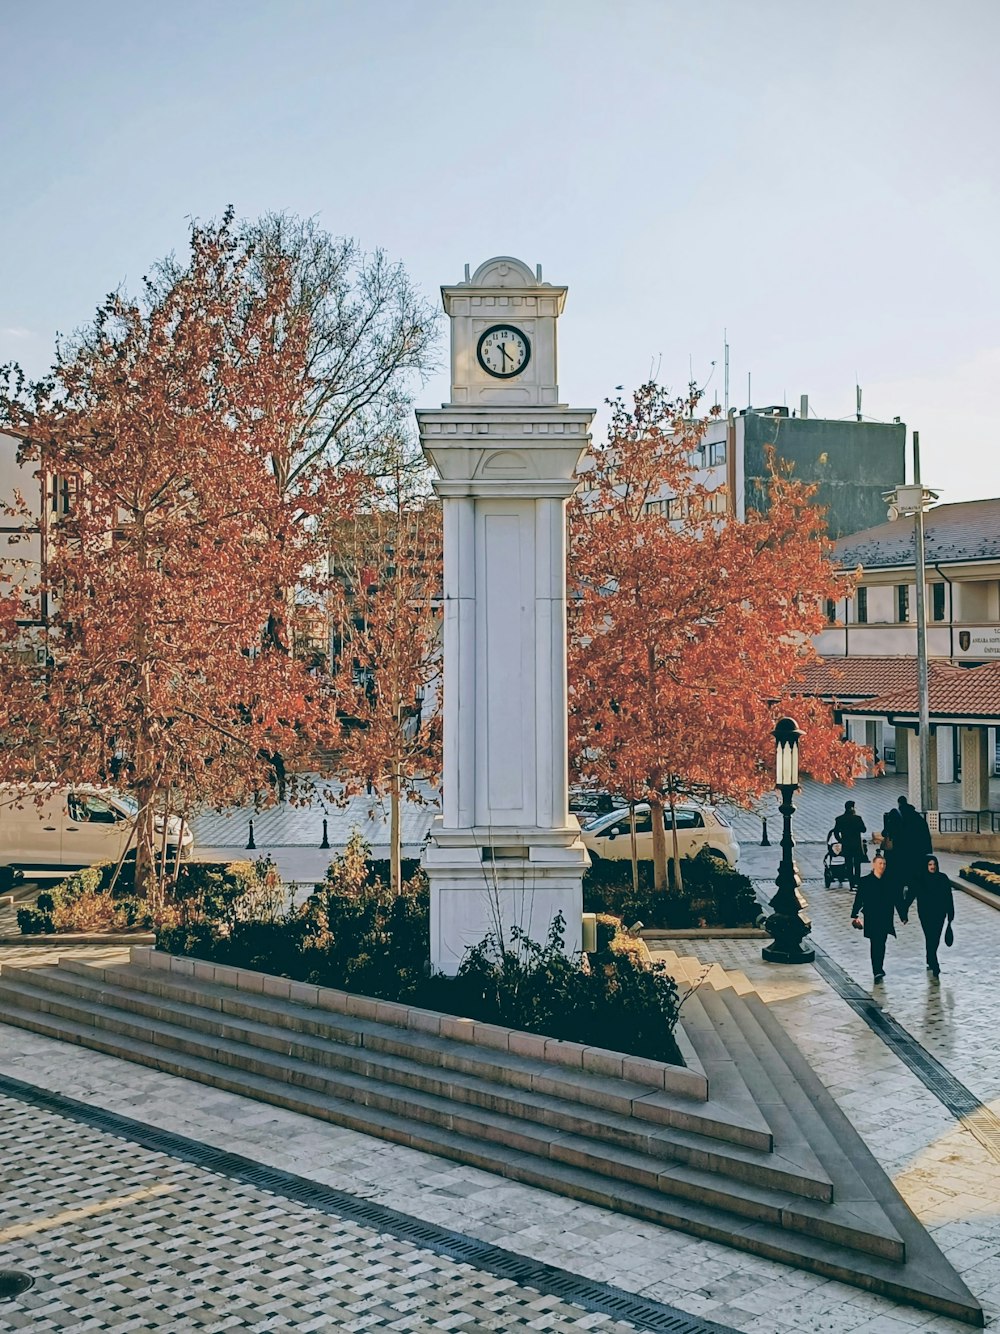 a white clock tower sitting in the middle of a park